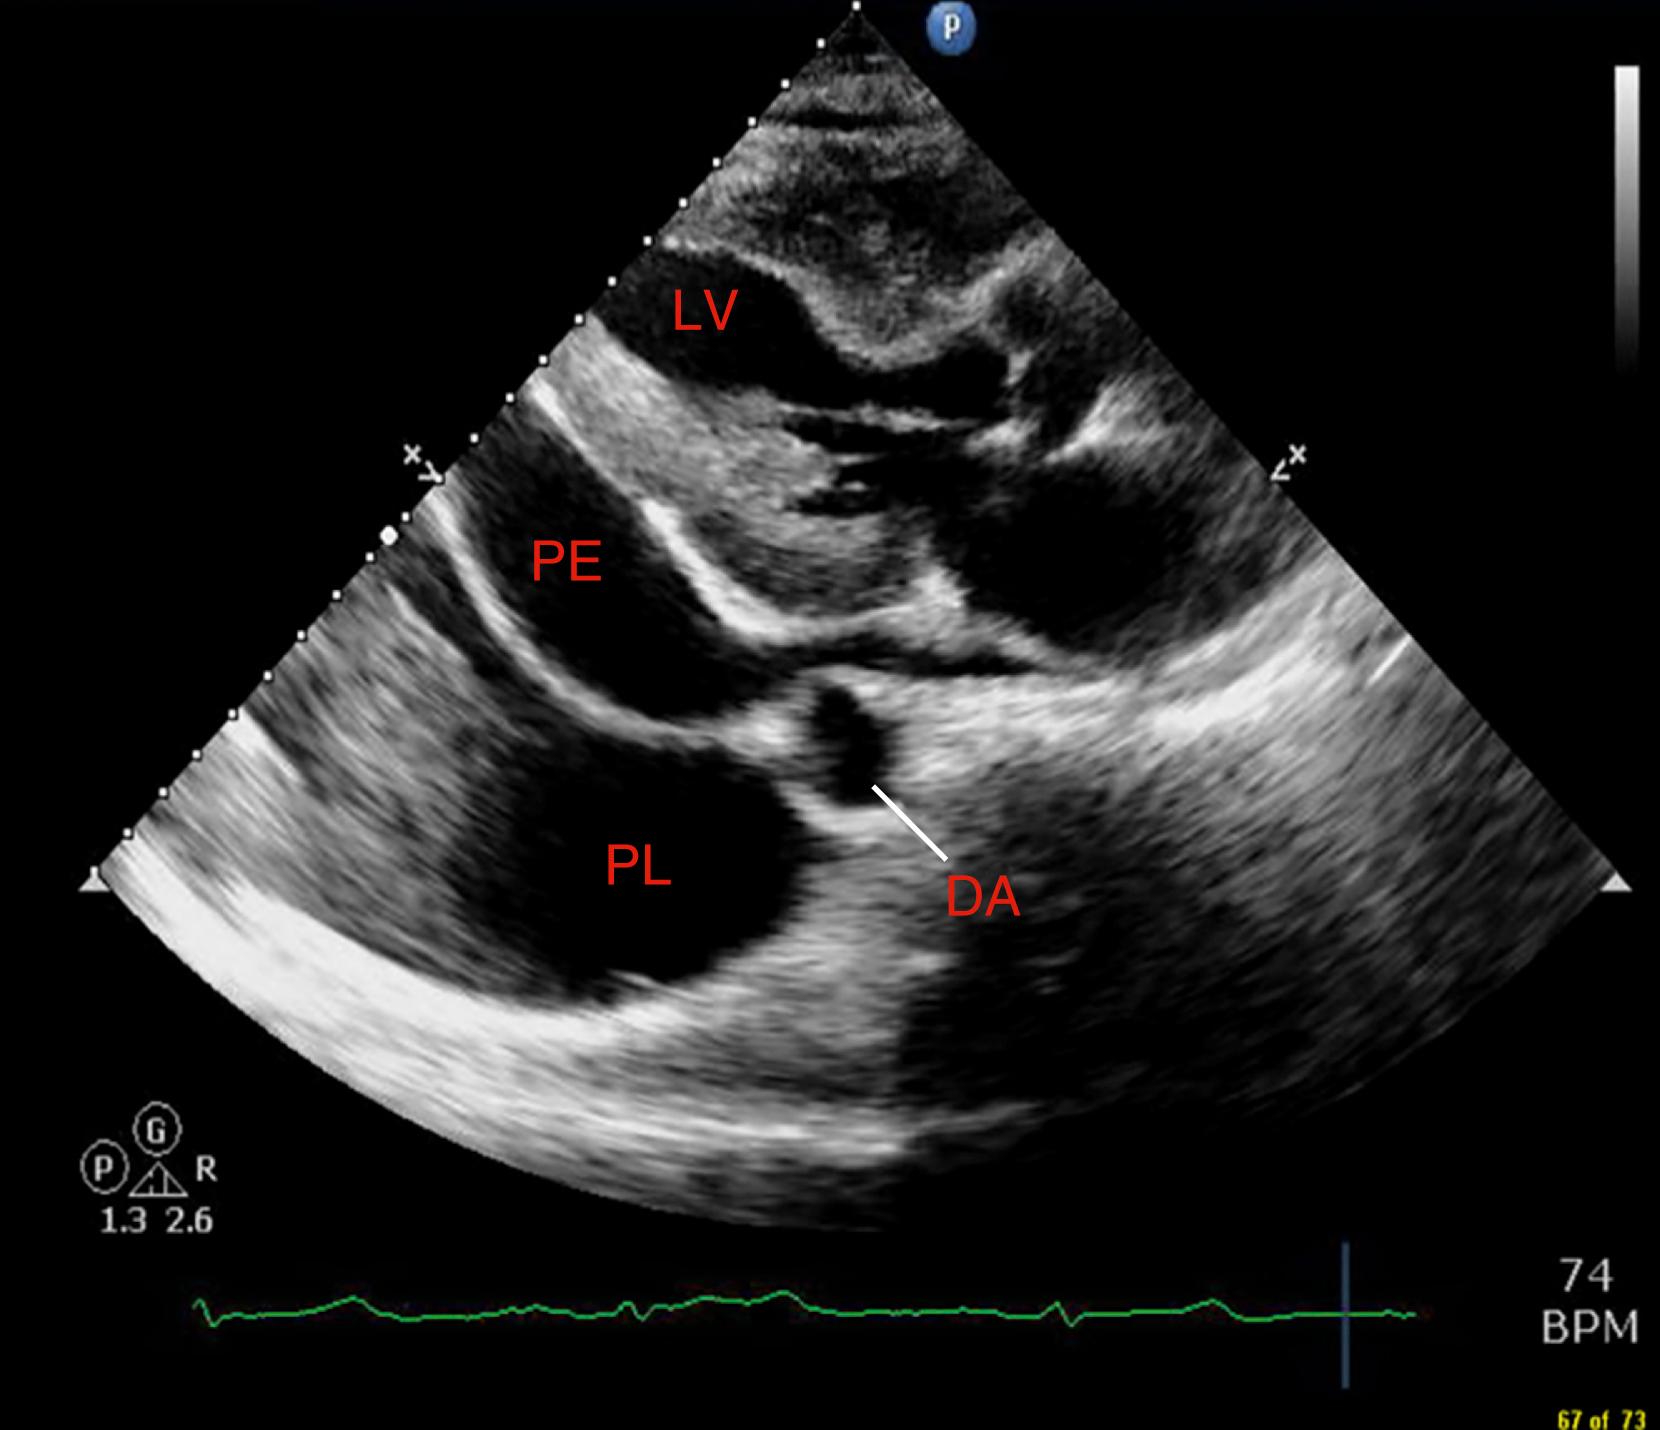 Figure 121.1, Parasternal long-axis image in a patient with both pericardial (PE) and pleural (PL) effusions. Note that the pericardial fluid lies anterior to the descending thoracic aorta (DA). The left ventricle (LV) is marked for reference.